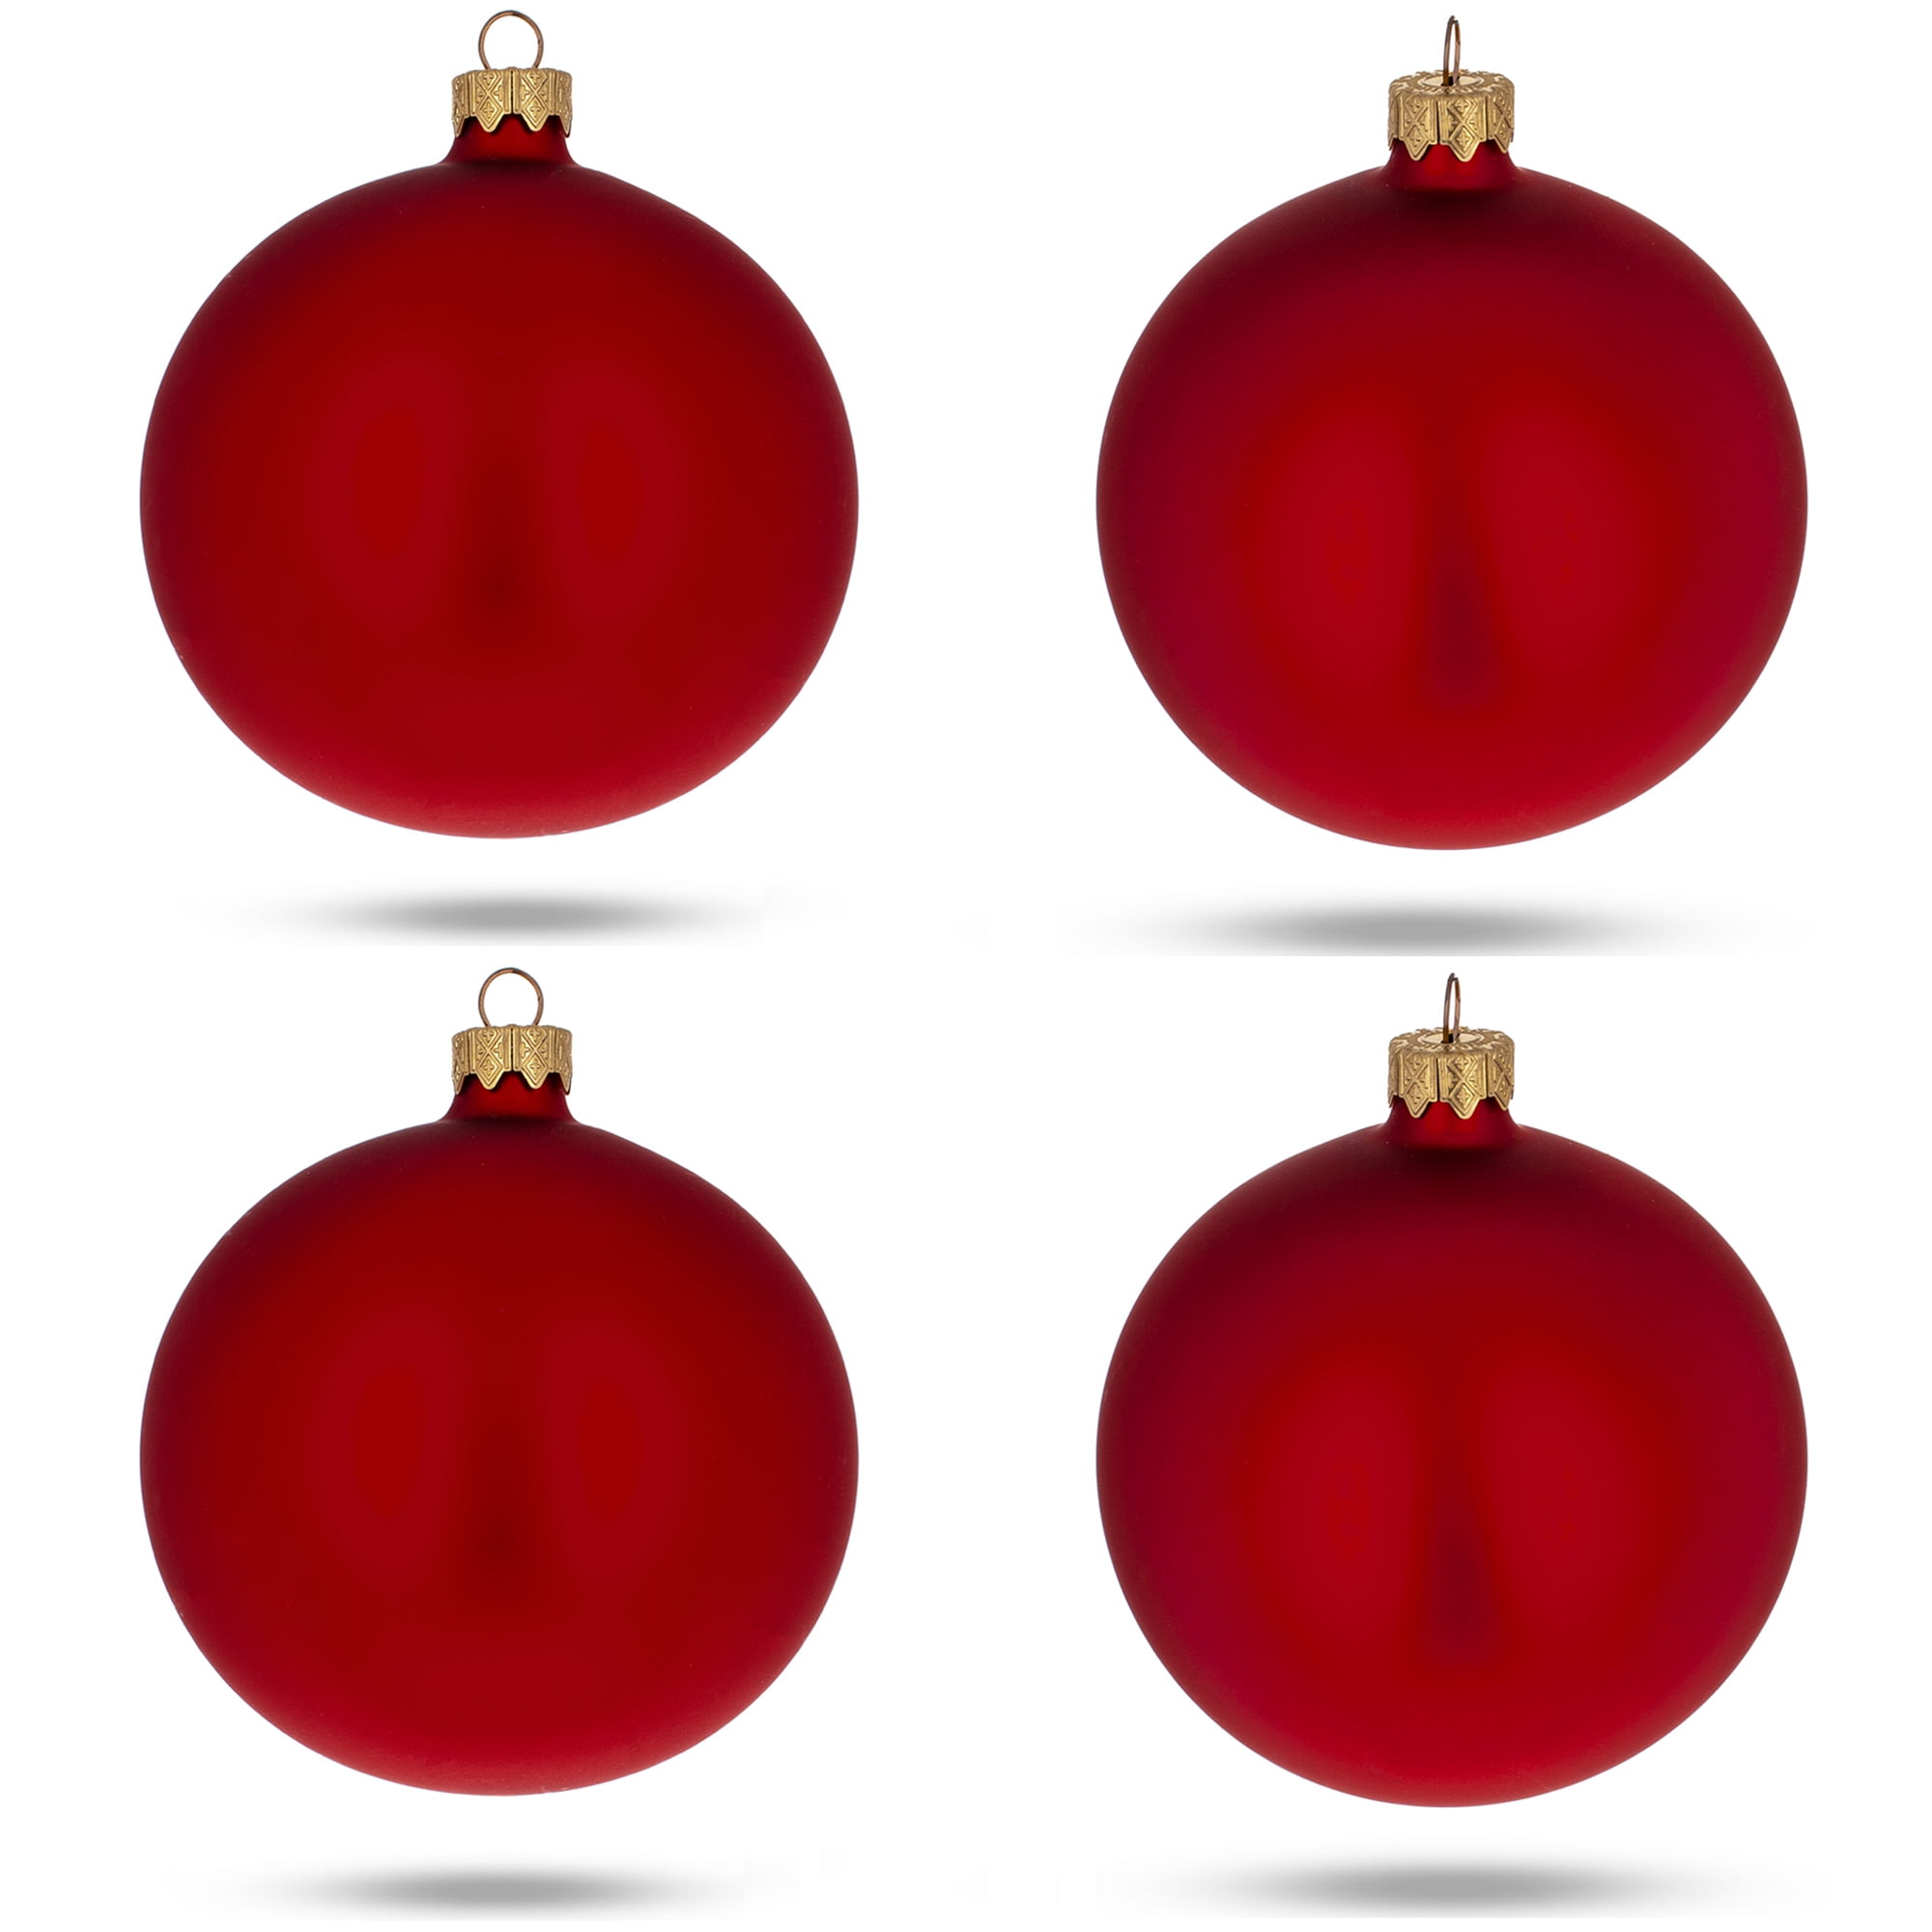 4 PACKAGES Details about   6 COUNT GLASS CHRISTMAS ORNAMENTS 